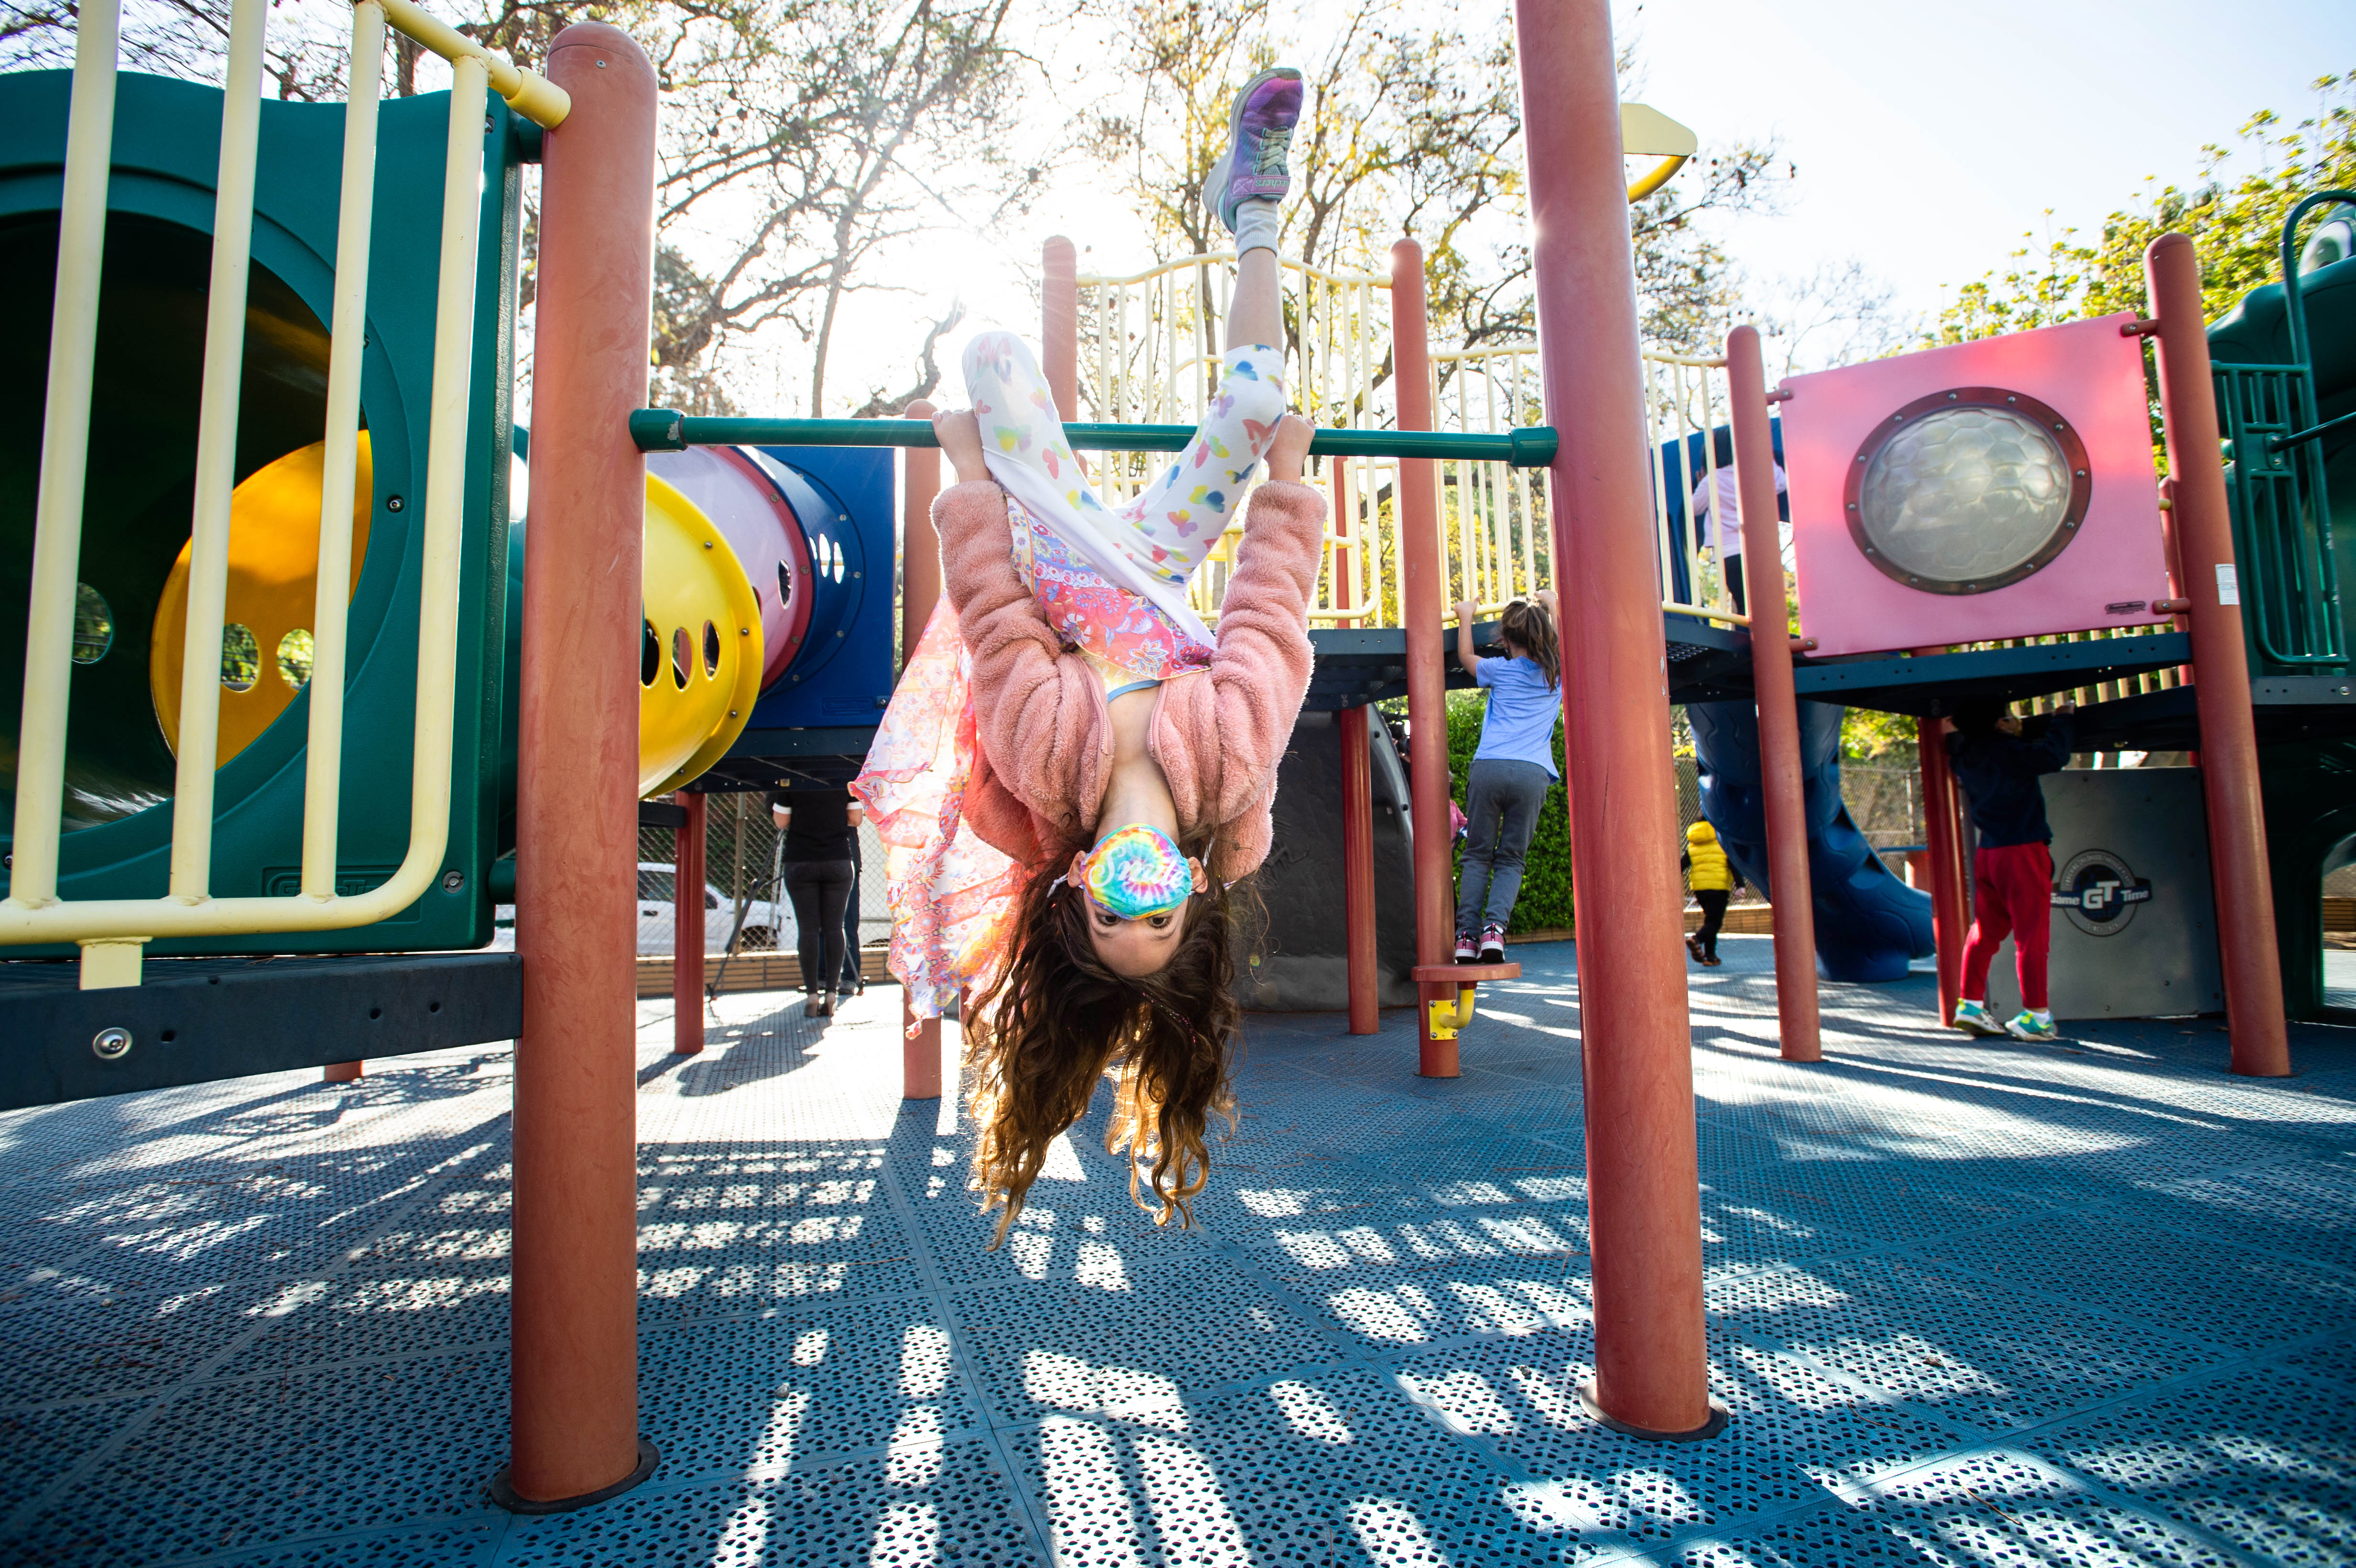 A masked kindergartner hangs upside down from playground equipment, her long hair dangling toward the ground.